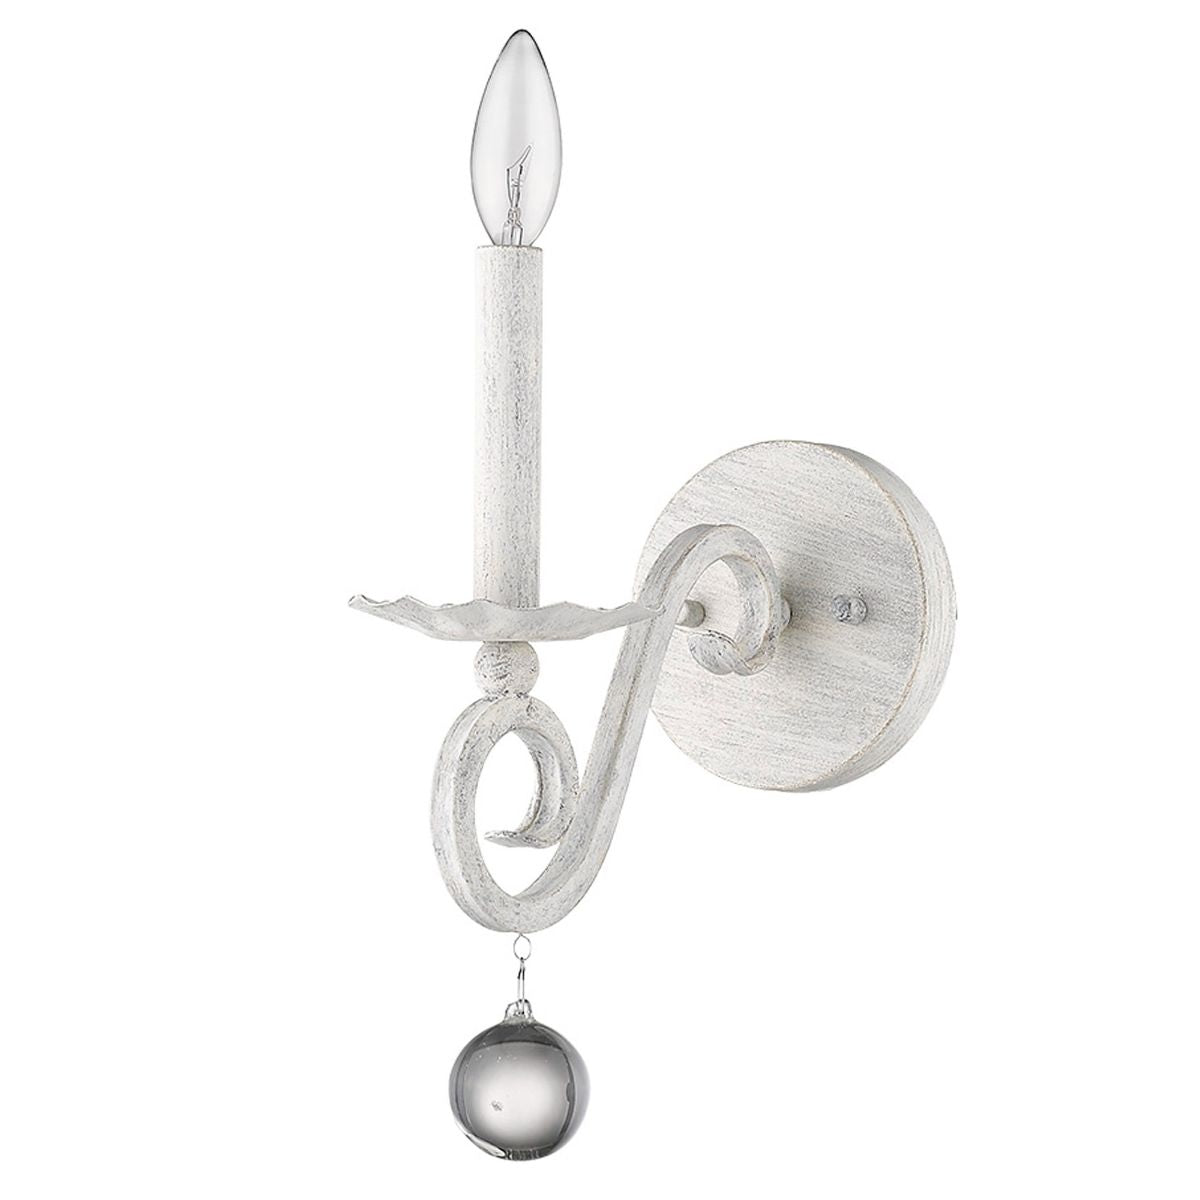 Callie 12 in. Armed Sconce White Finish